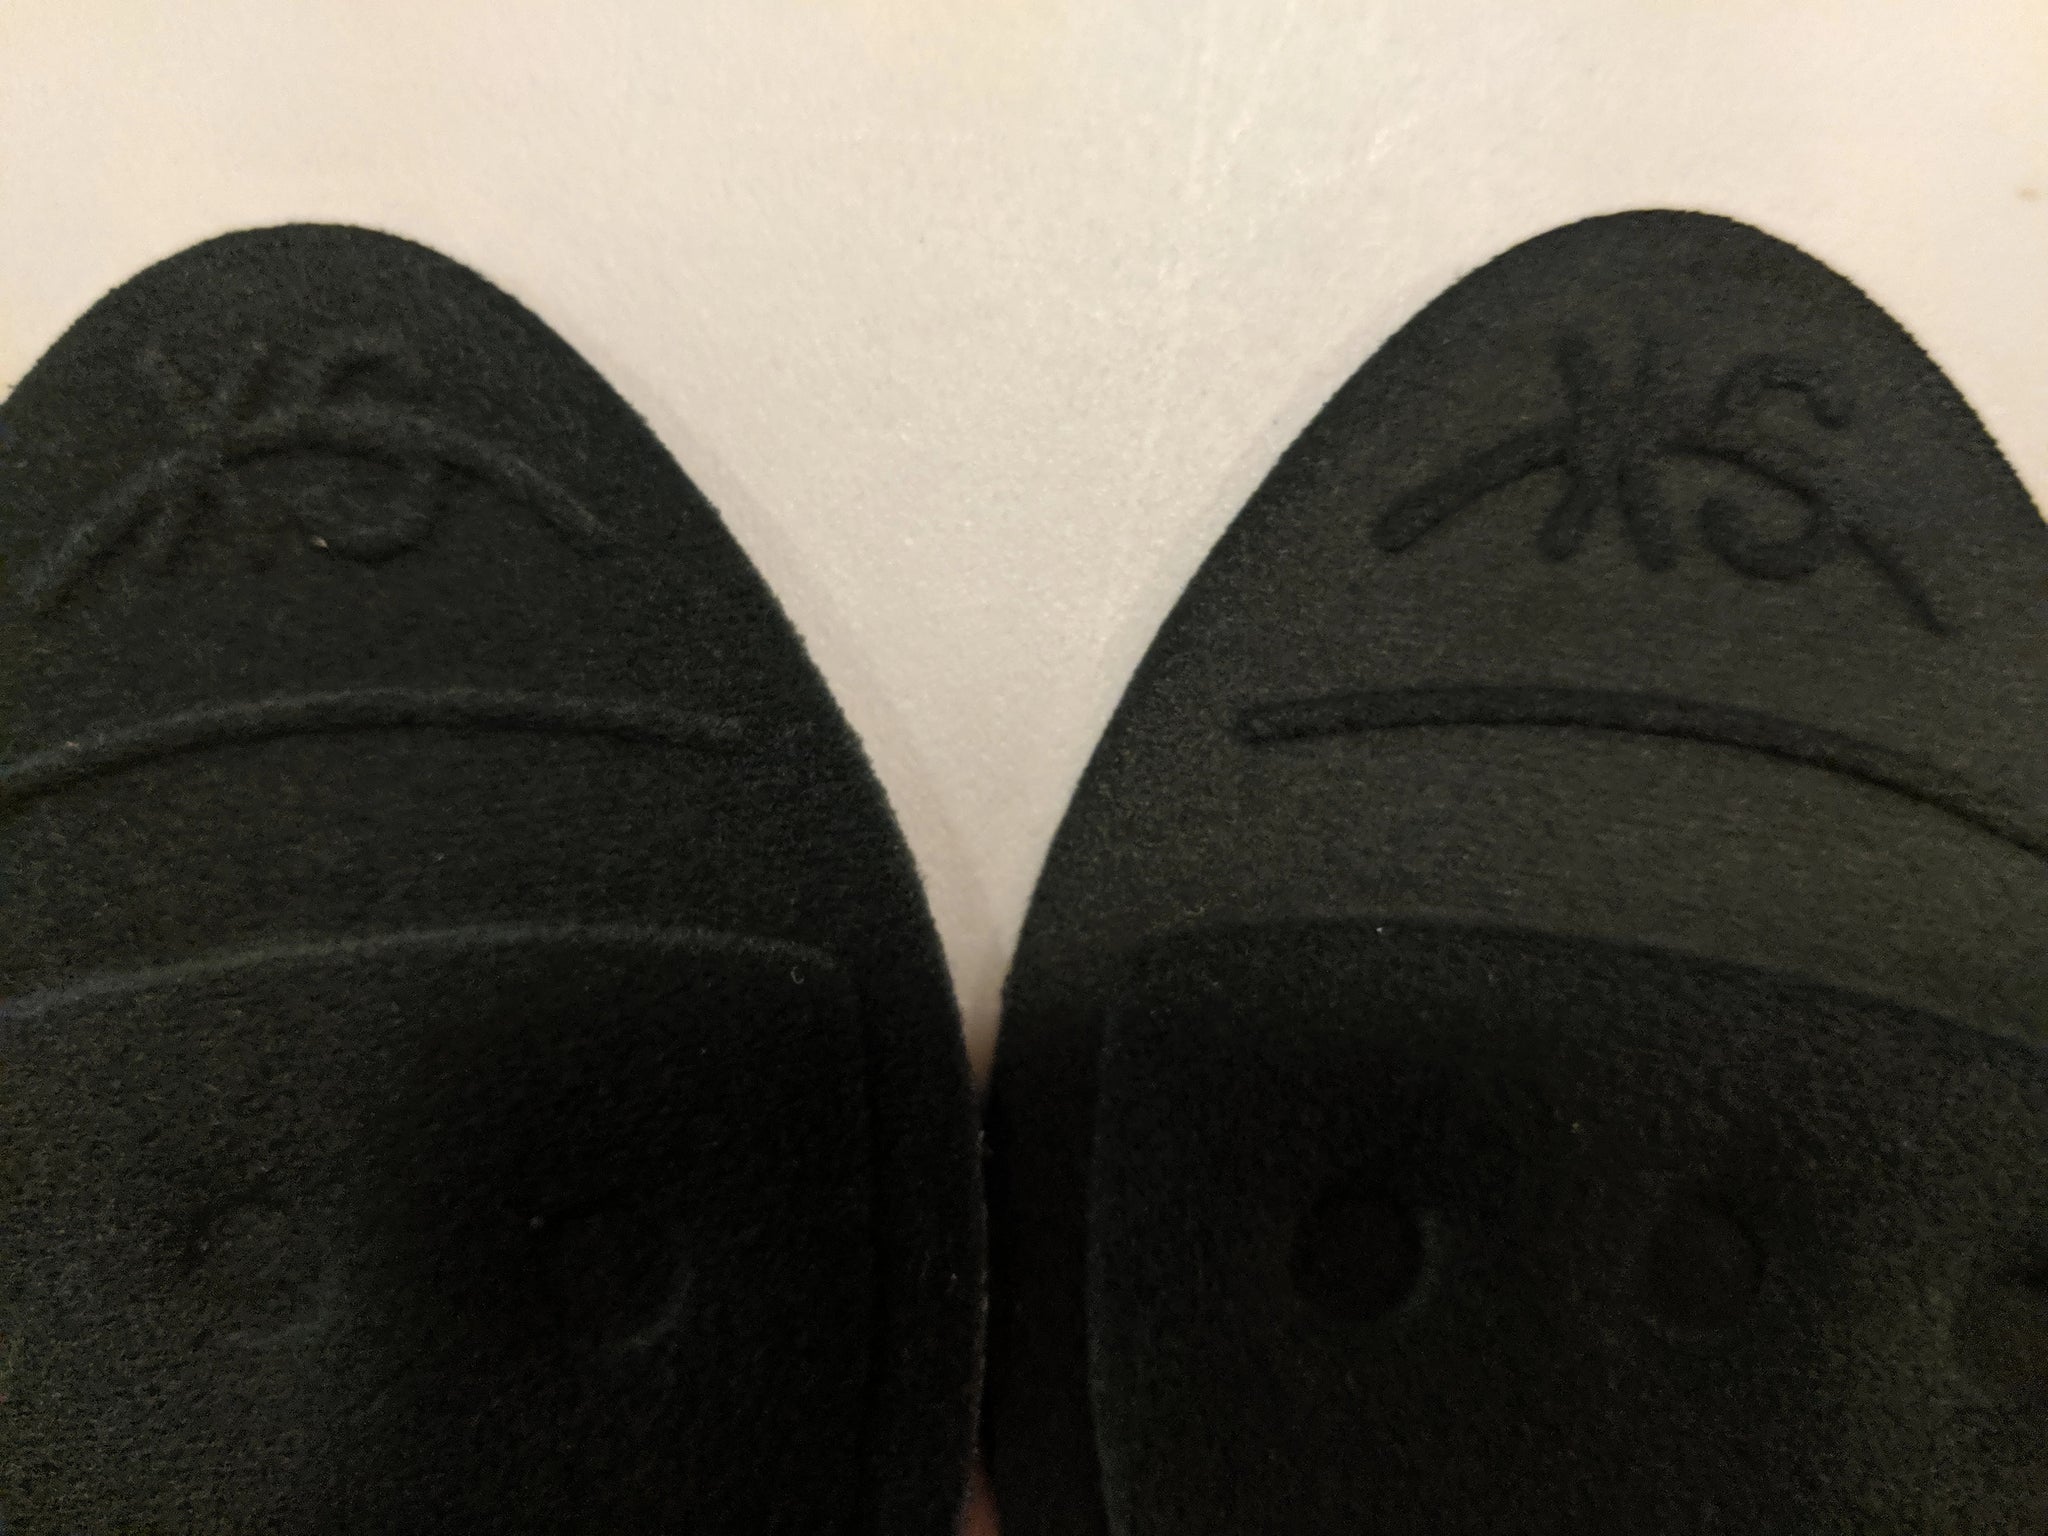 air filled insoles